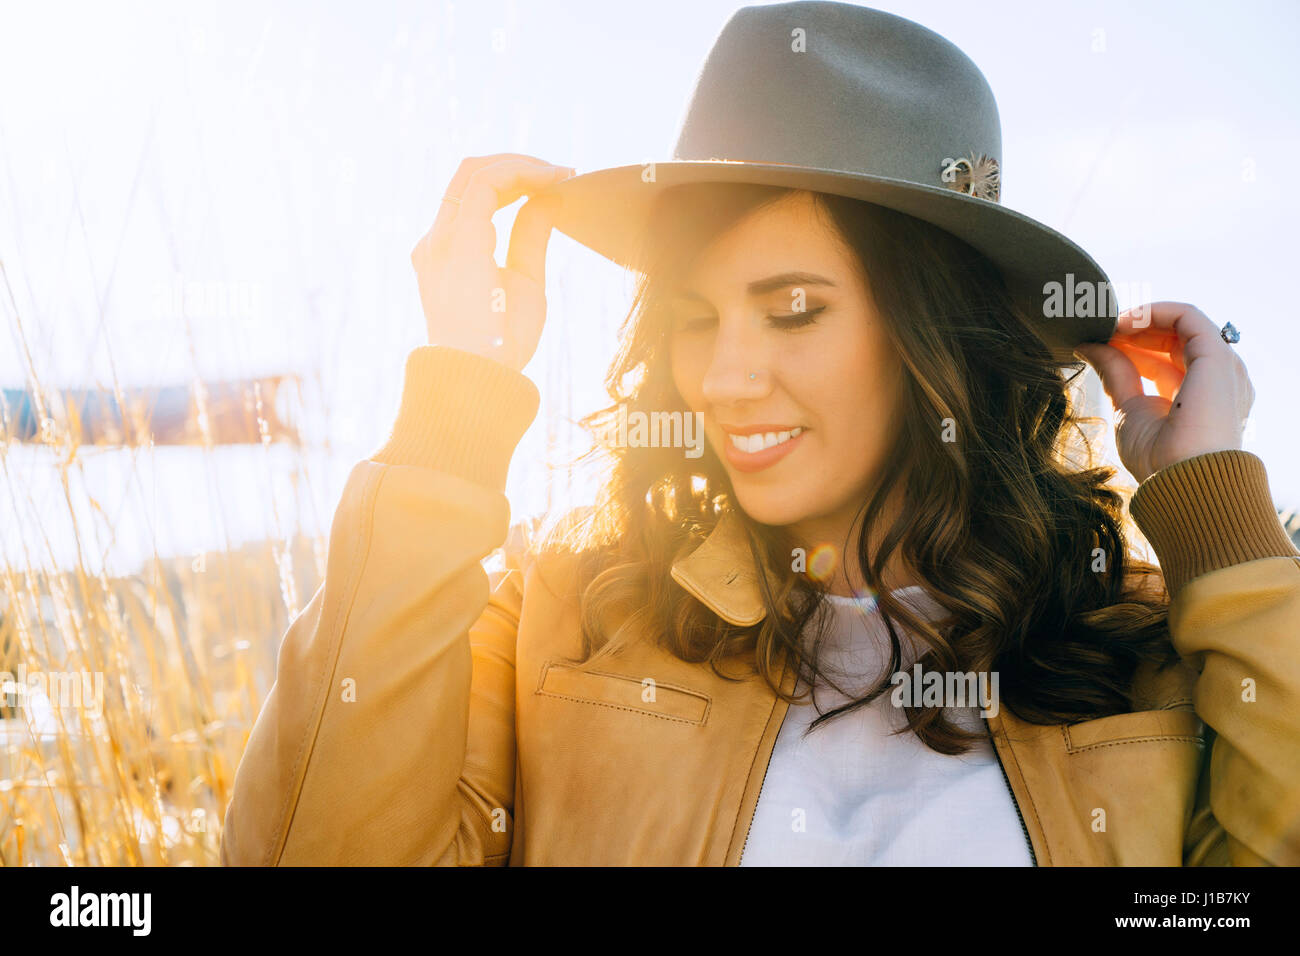 Portrait of smiling Mixed Race woman adjusting hat Stock Photo